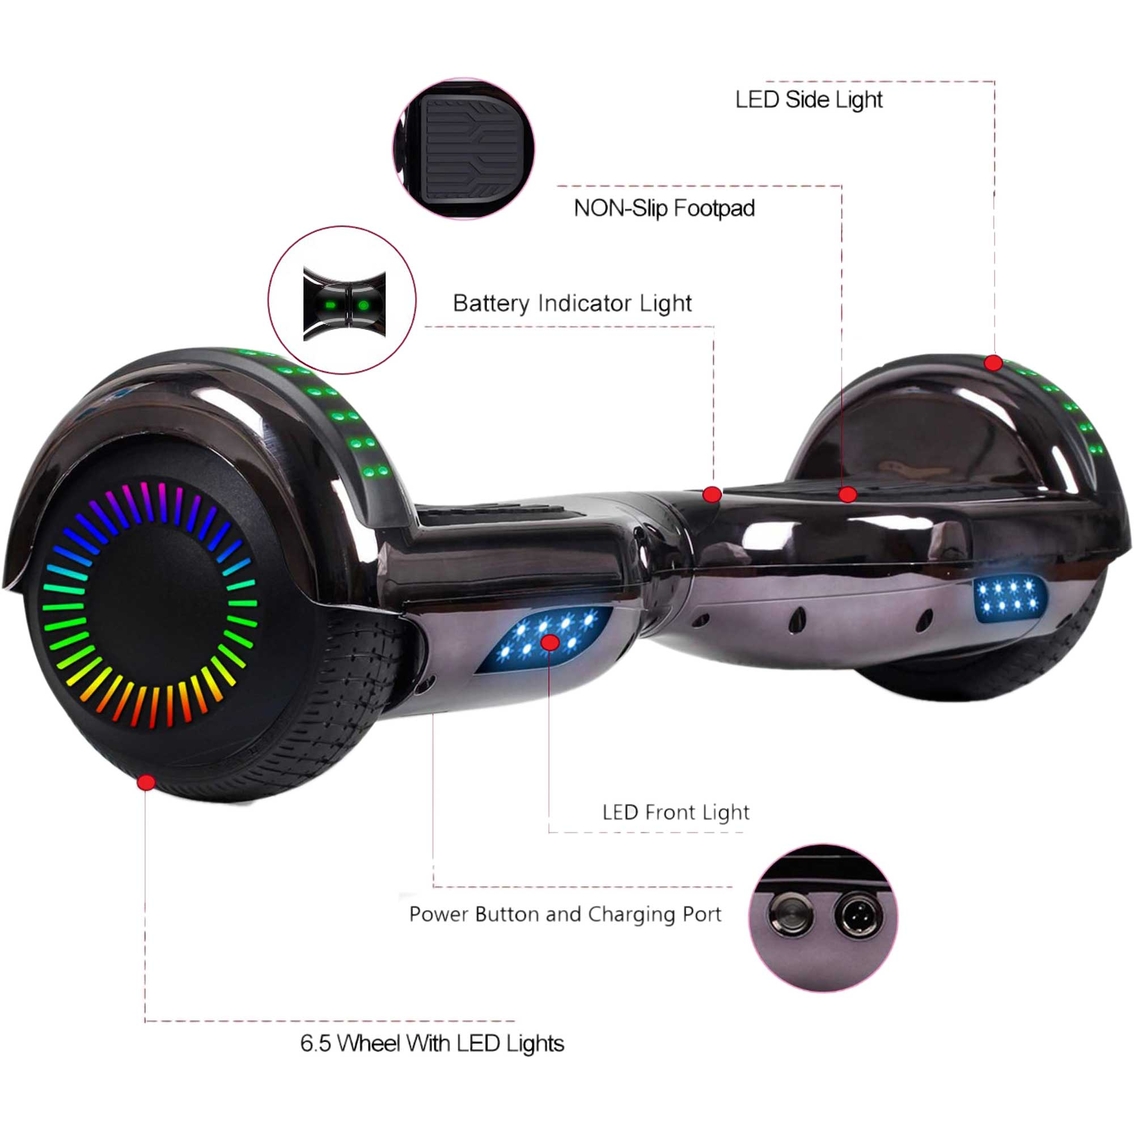 GlareWheel Hoverboard with Bluetooth Speaker and Light Up Wheels - Image 4 of 6